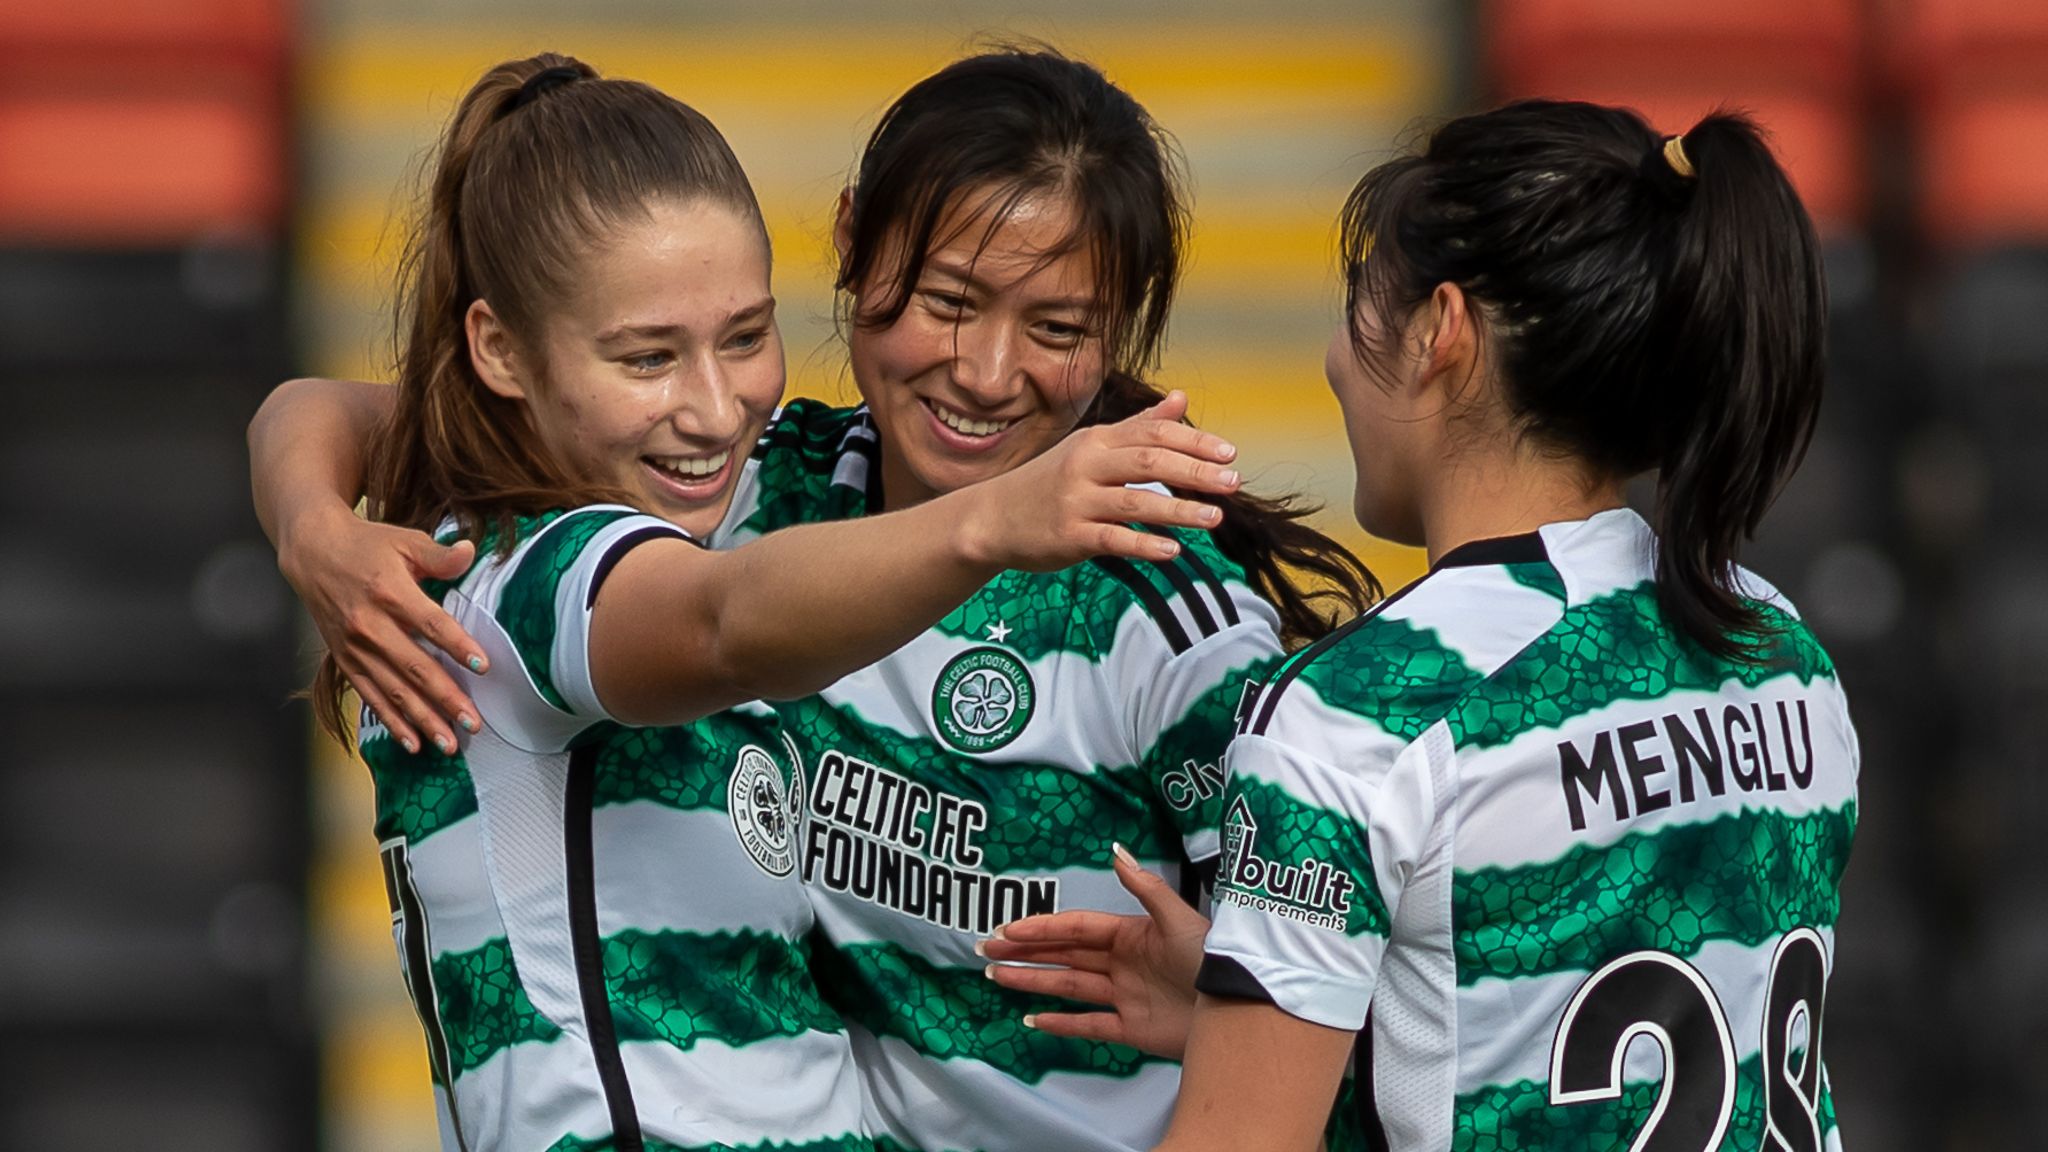 Edinburgh & Glasgow launch women's teams to play in expanded Celtic  Challenge - BBC Sport